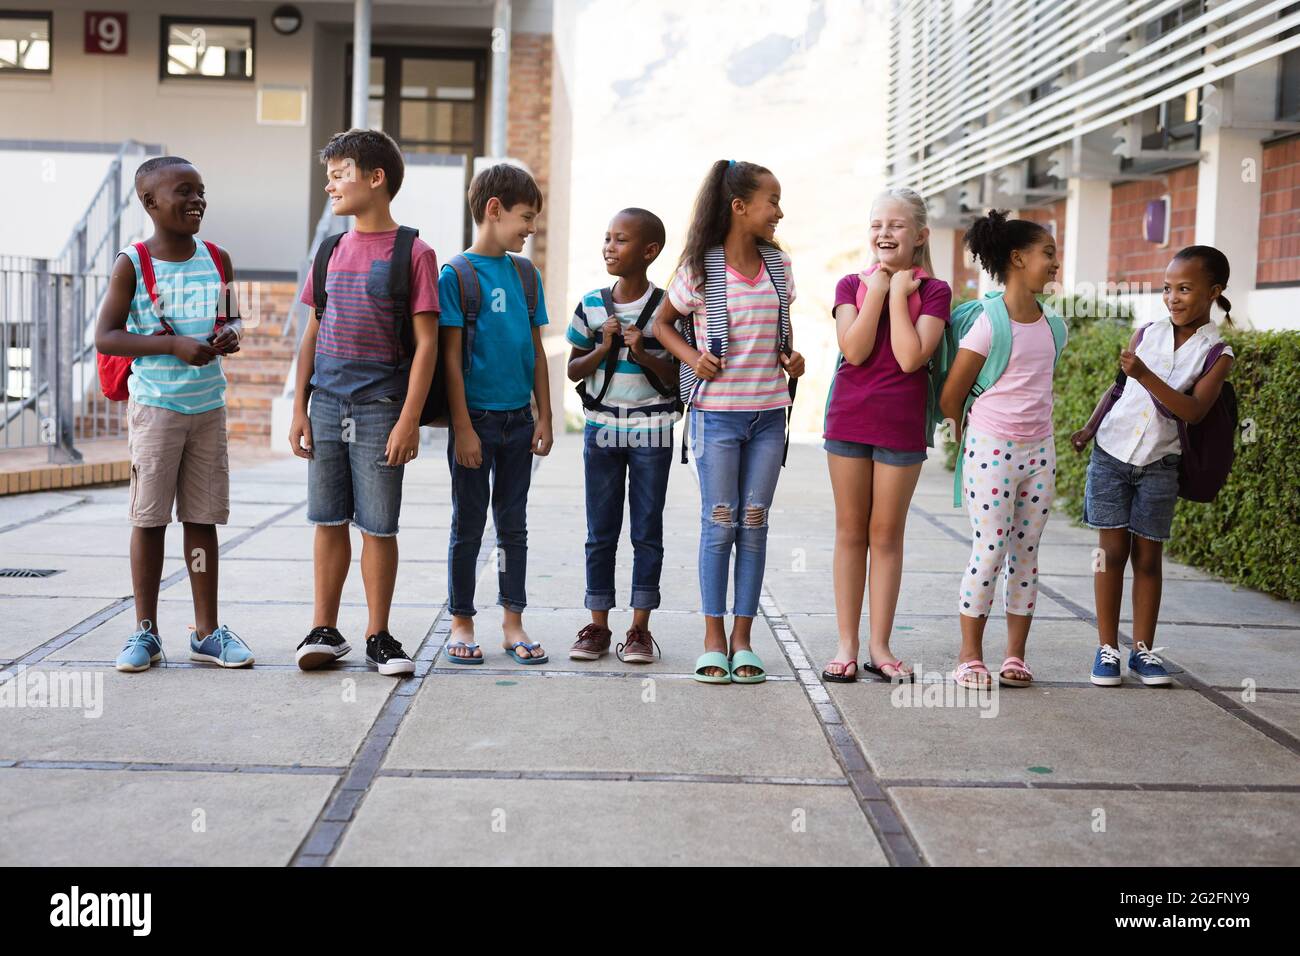 Group of diverse students with backpacks smiling while looking at each other at school Stock Photo